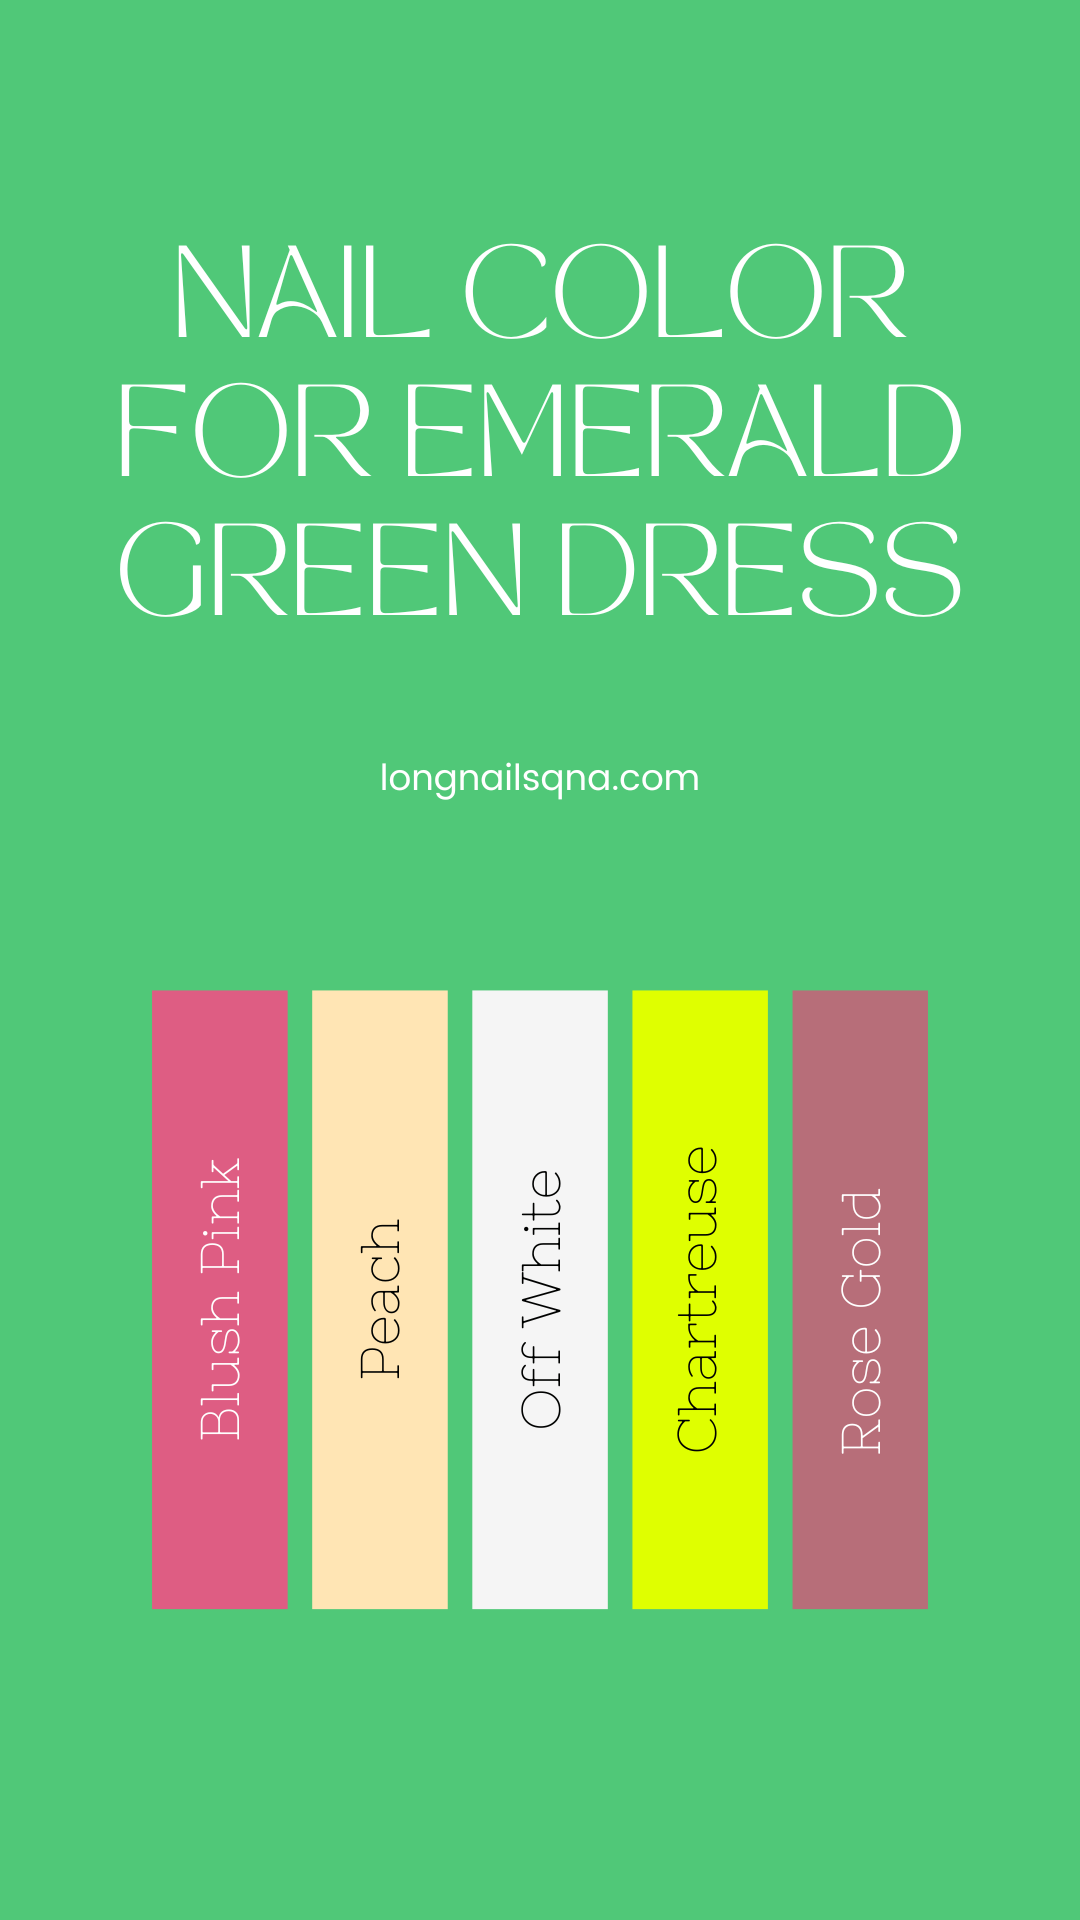 Nail Color for Emerald Green Dress